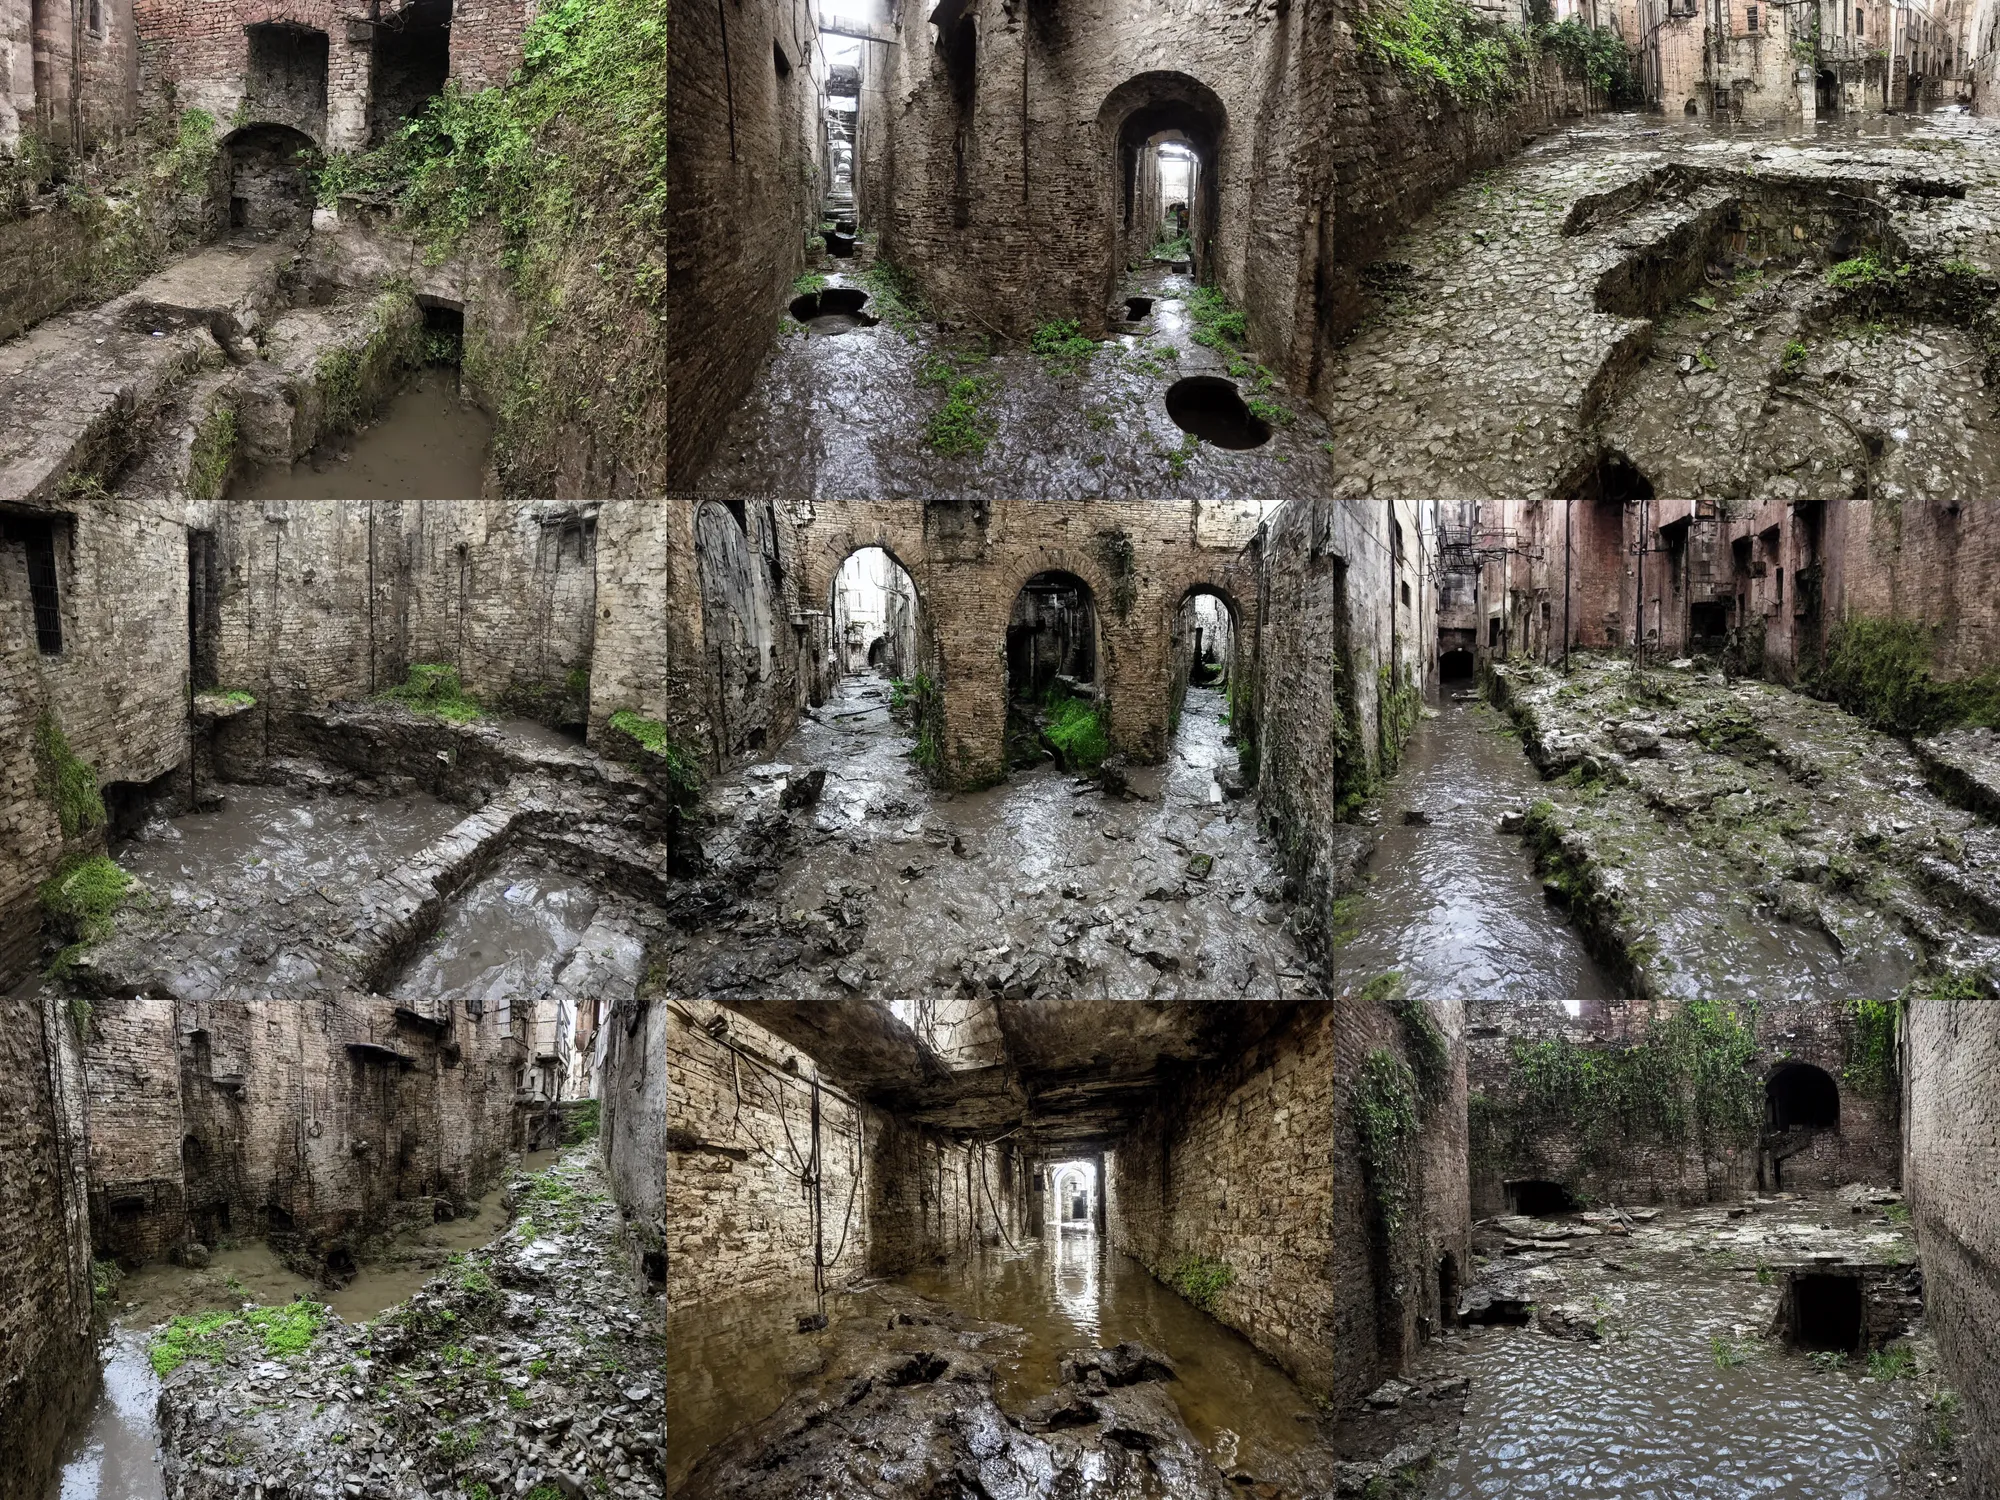 Prompt: inside the ancient flooded sewers in the old part of the city. dripping water, standing water, channel, stagnant water, waterfall, rivulets, musty, moss, sewage, dark, underground, abandoned spaces, torch - lit.